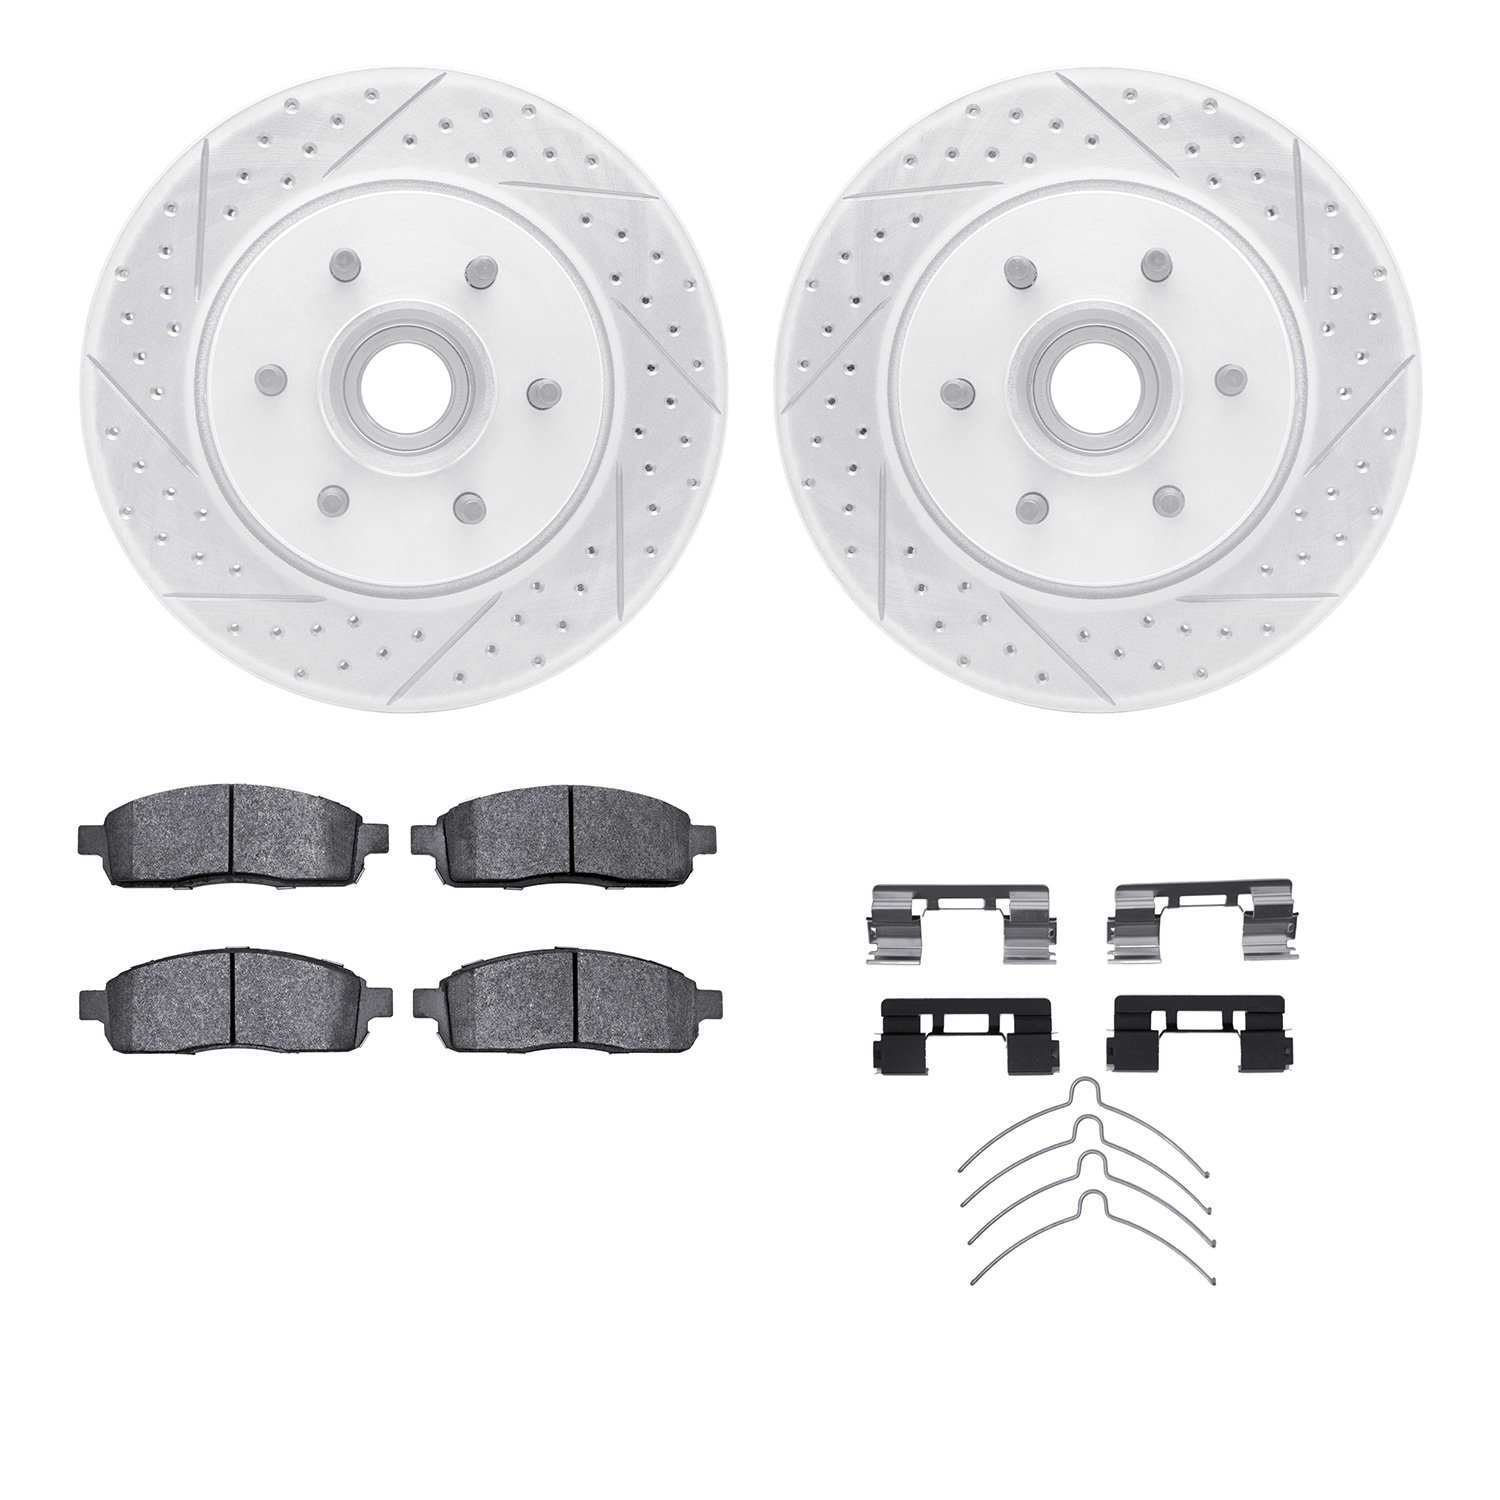 2212-99136 Geoperformance Drilled/Slotted Rotors w/Heavy-Duty Pads Kit & Hardware, 2004-2008 Ford/Lincoln/Mercury/Mazda, Positio